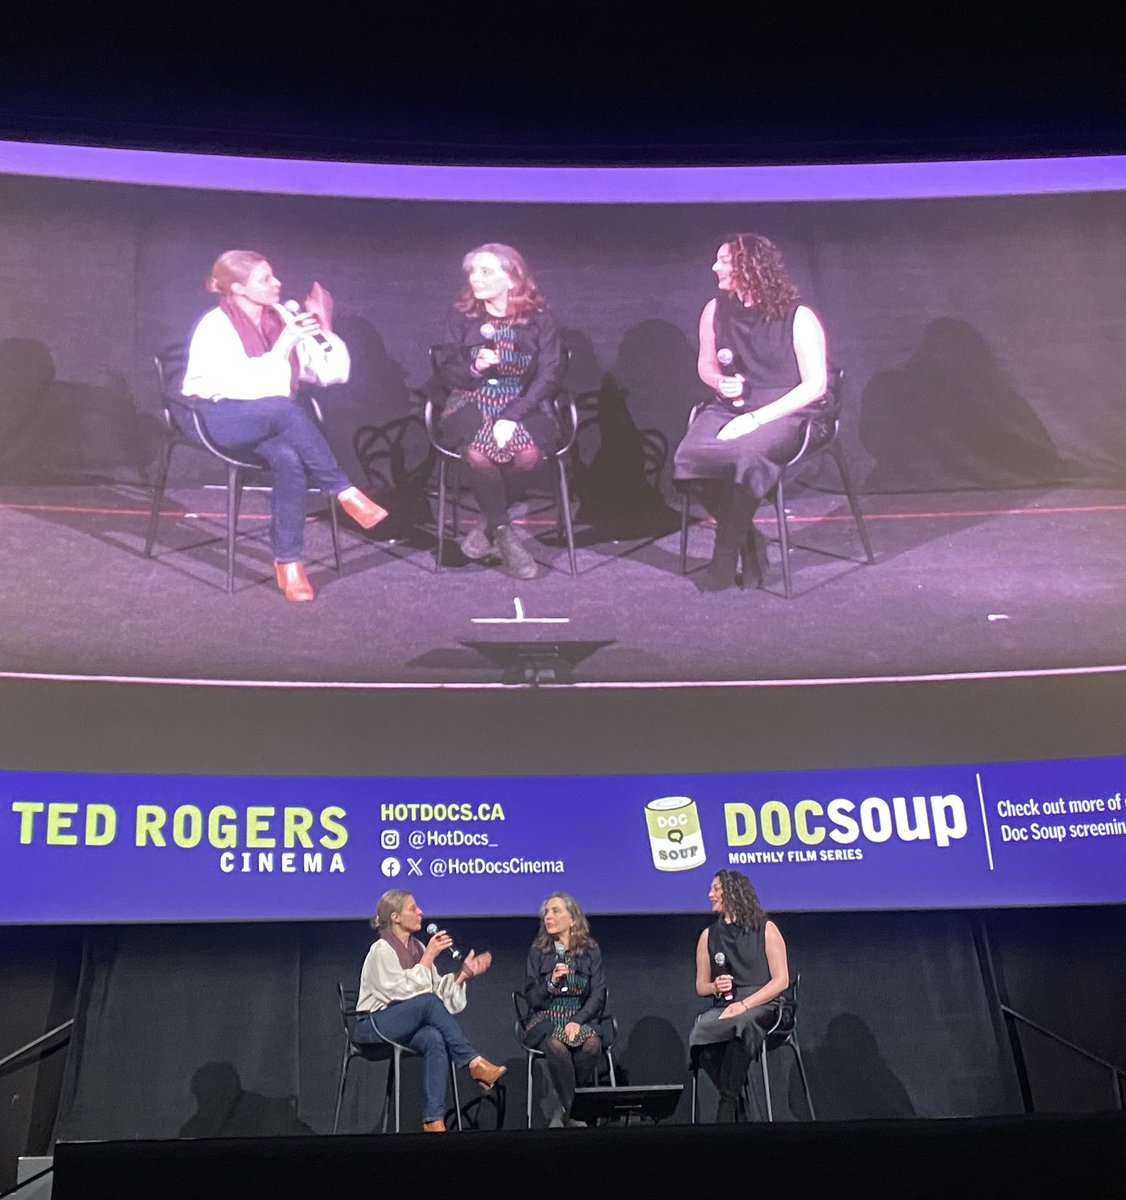 #StolenTime is story every person ought to know. It was an honour to be among the full audience and connect with others, broken hearted yet determined to demand #SafeLTC in Canada. Thank you for seeing us @heleneklodawsky @MeMiller777 @HotDocs #LTCJustice